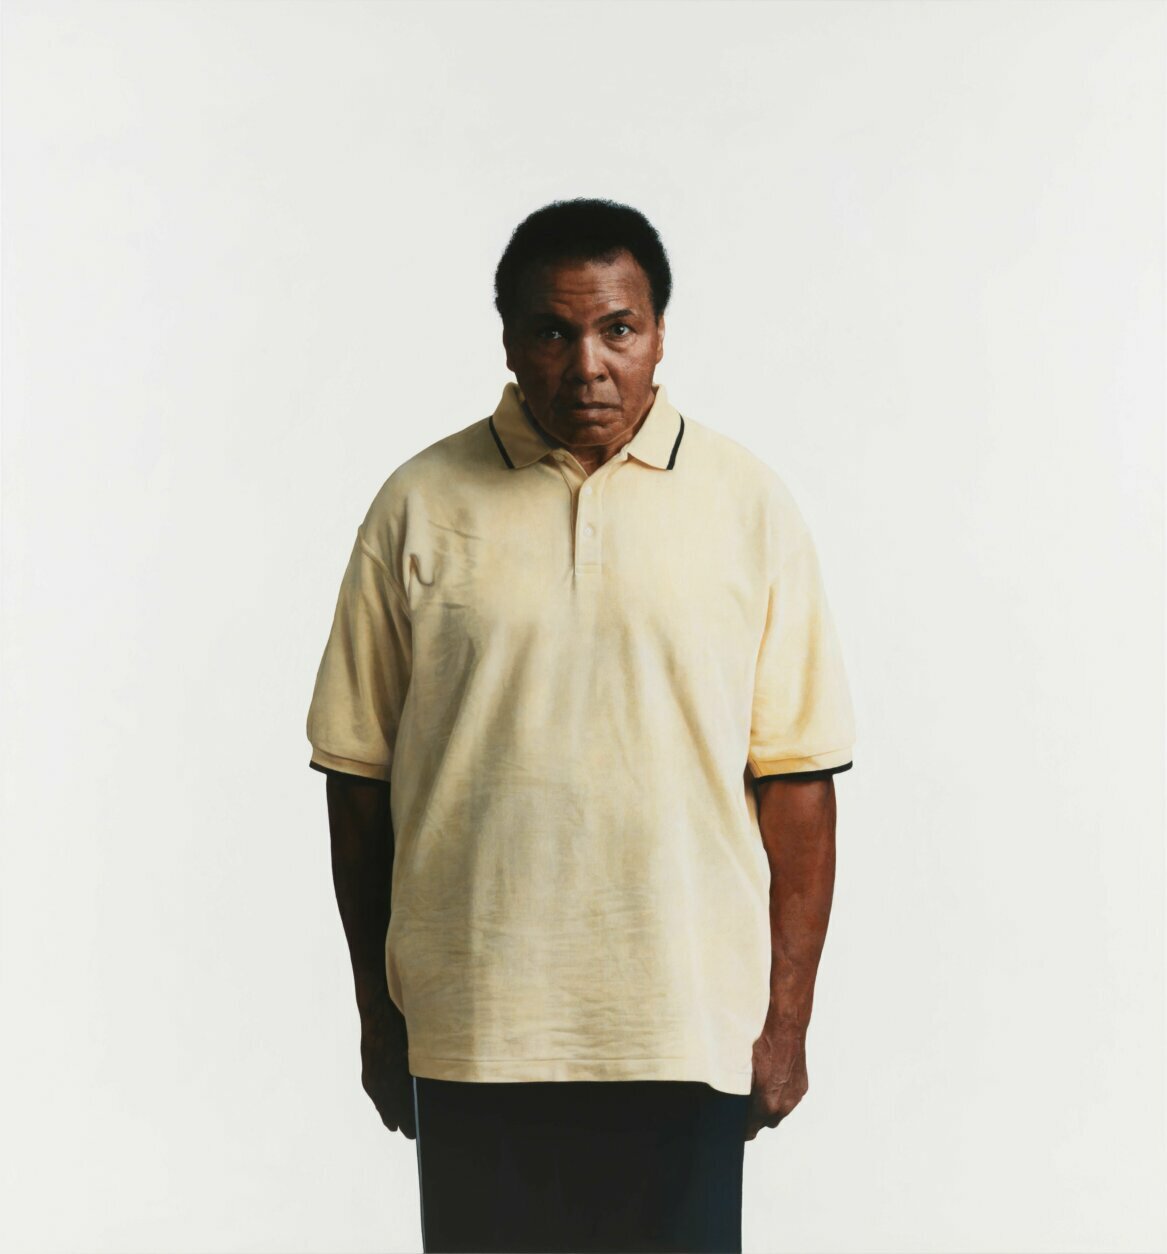 <p>This oil-on-canvas portrait of Muhammad Ali was painted by Robert McCurdy in 2017.</p>
